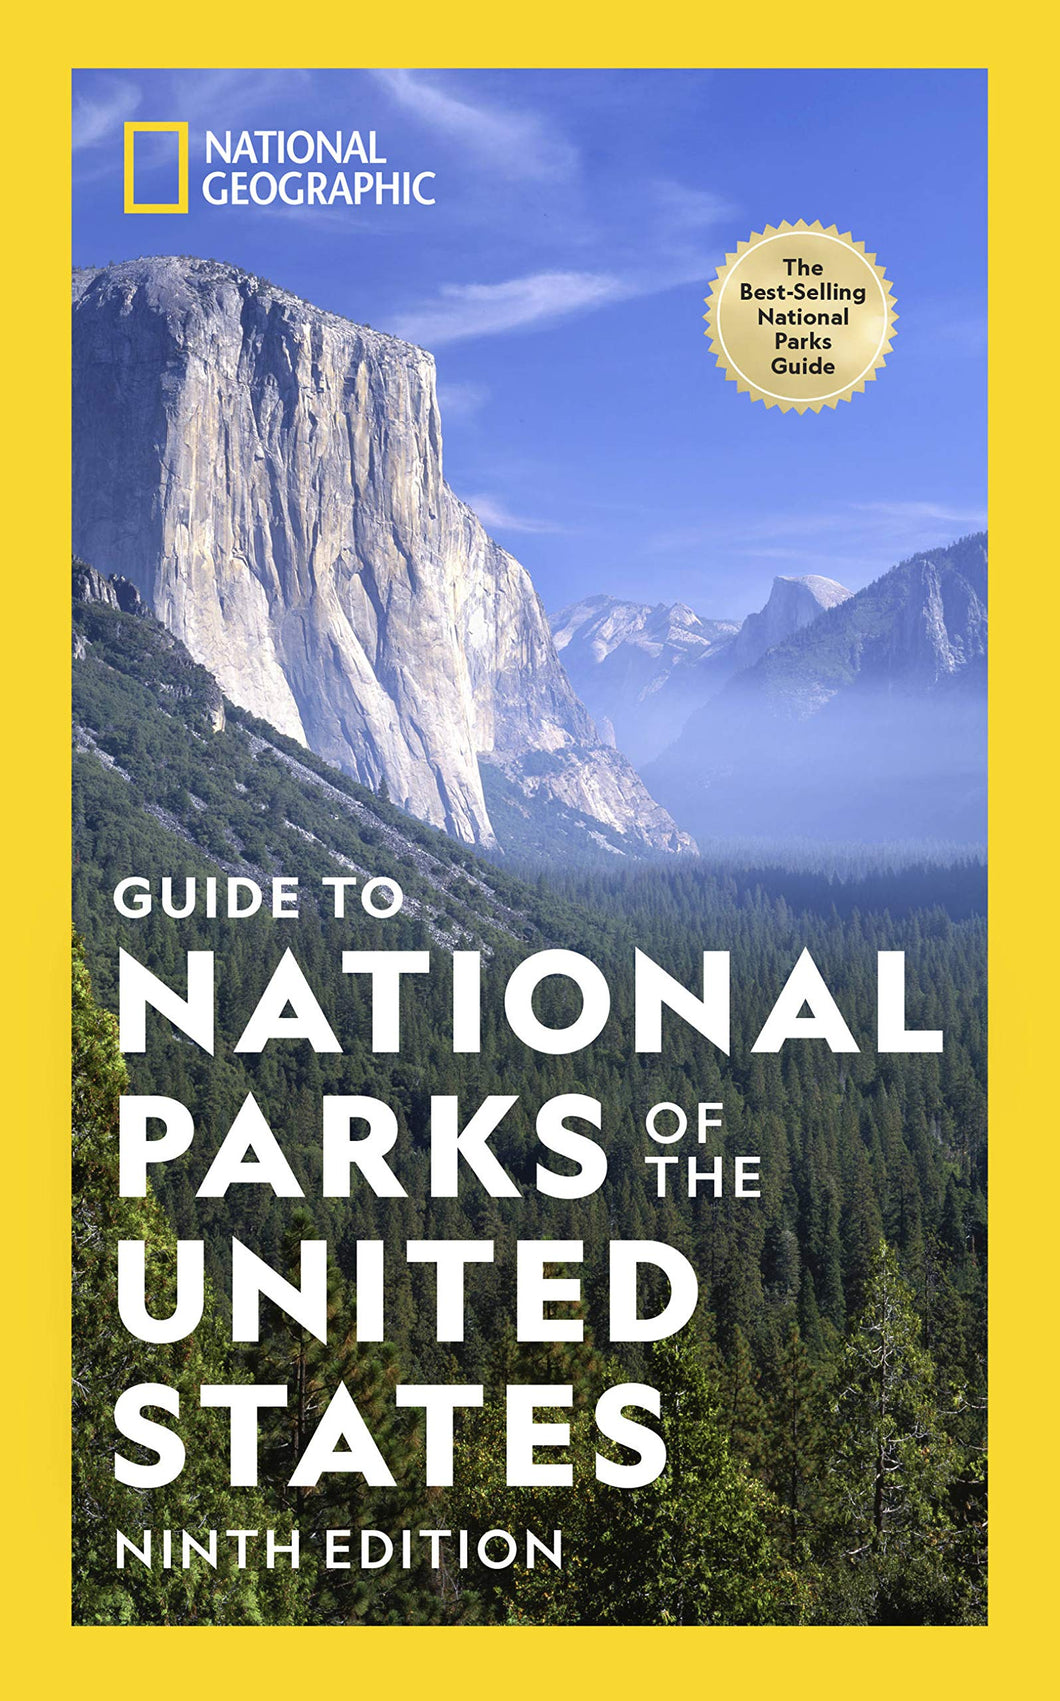 National Geographic: Guide To National Parks Of The United States, 9th Edition